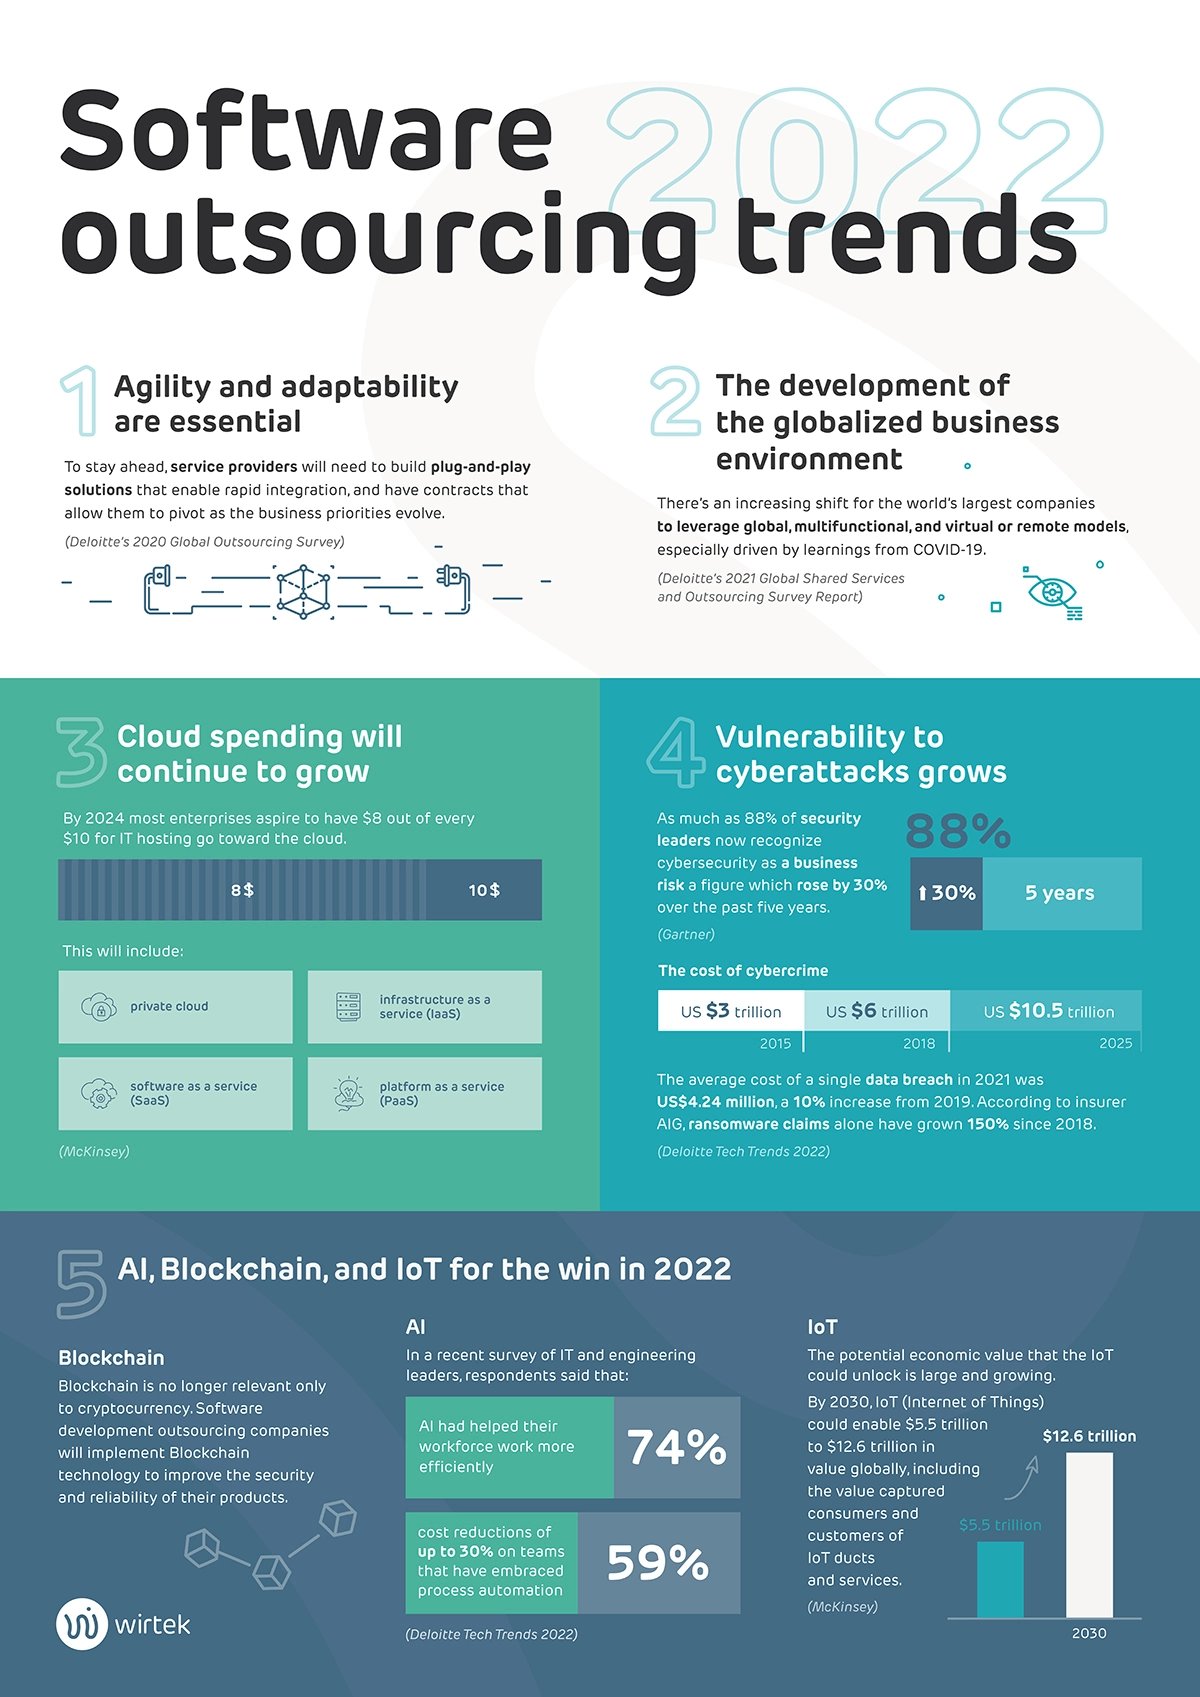 Wirtek_Infographic_Software-outsourcing-trends-in-2022_